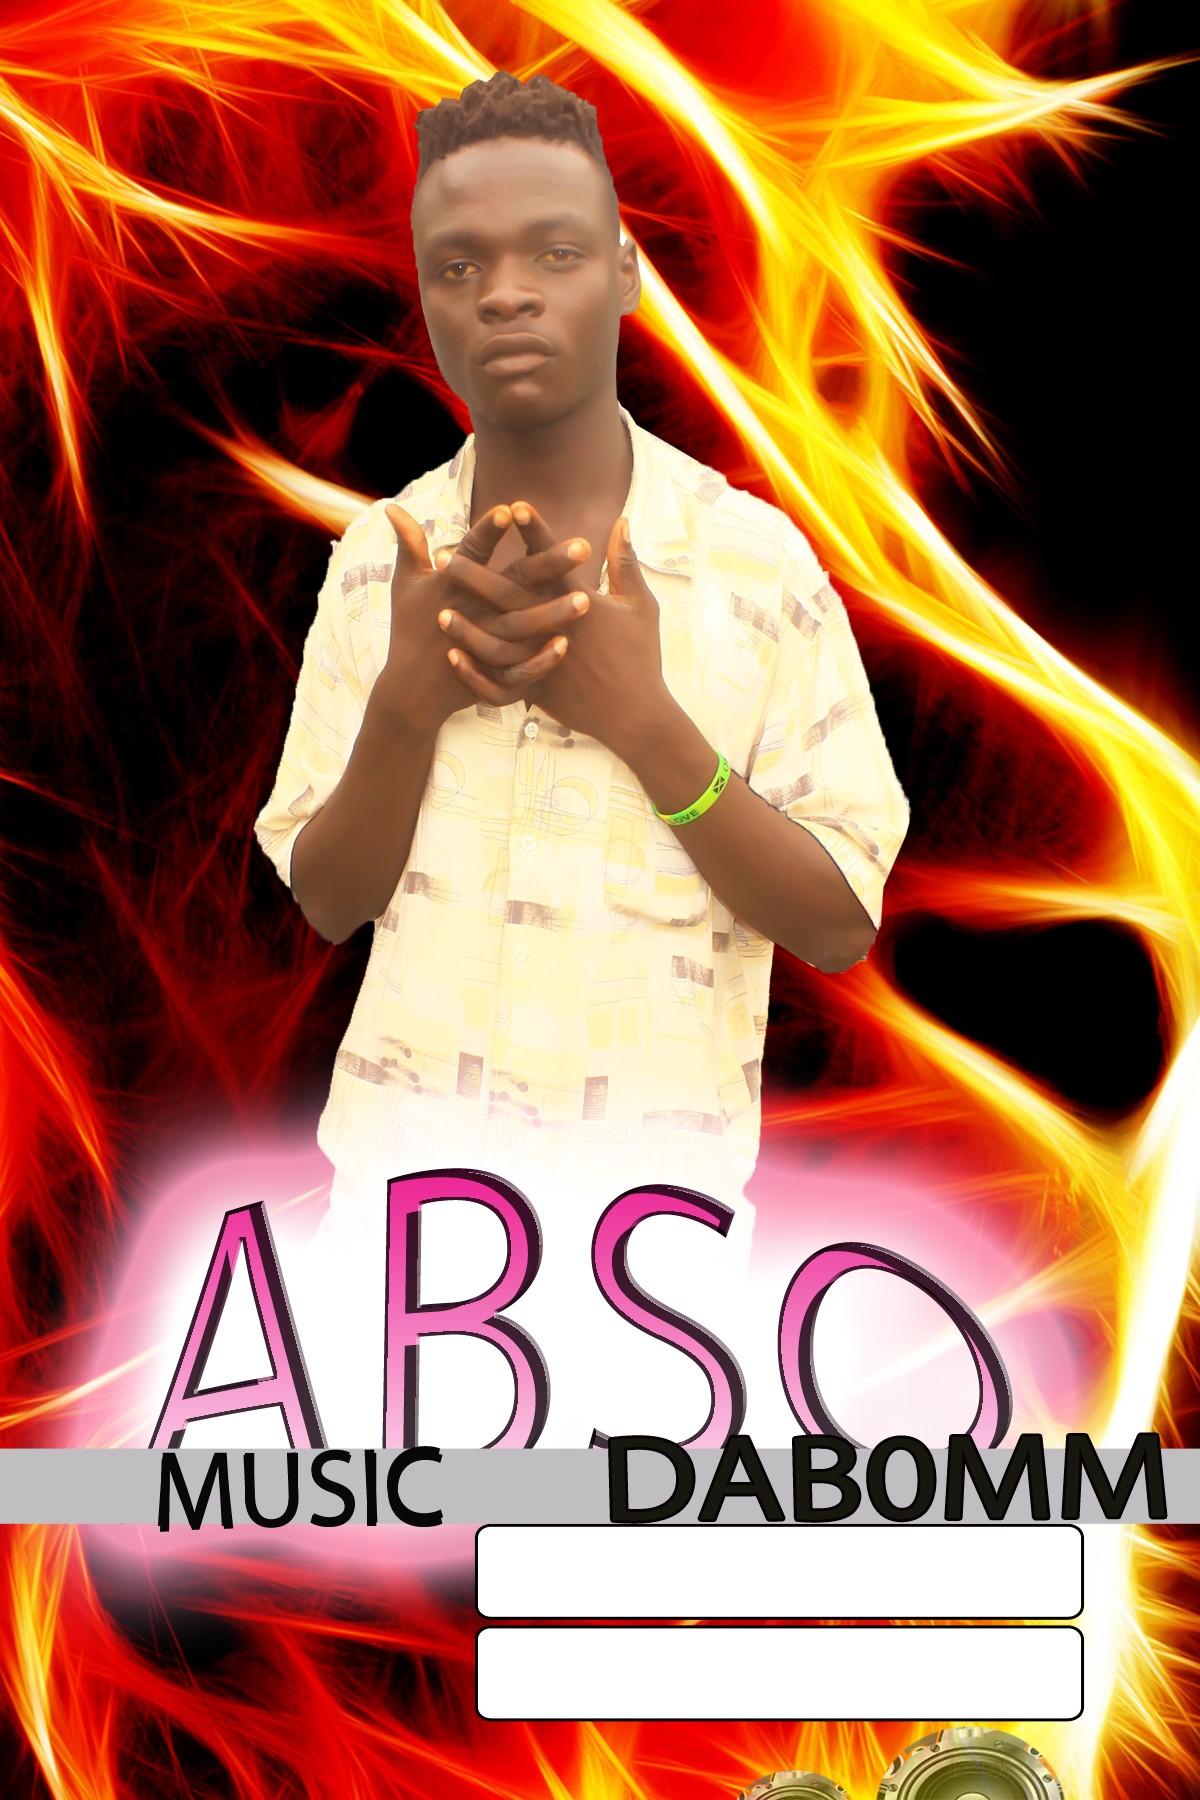 Abso Music